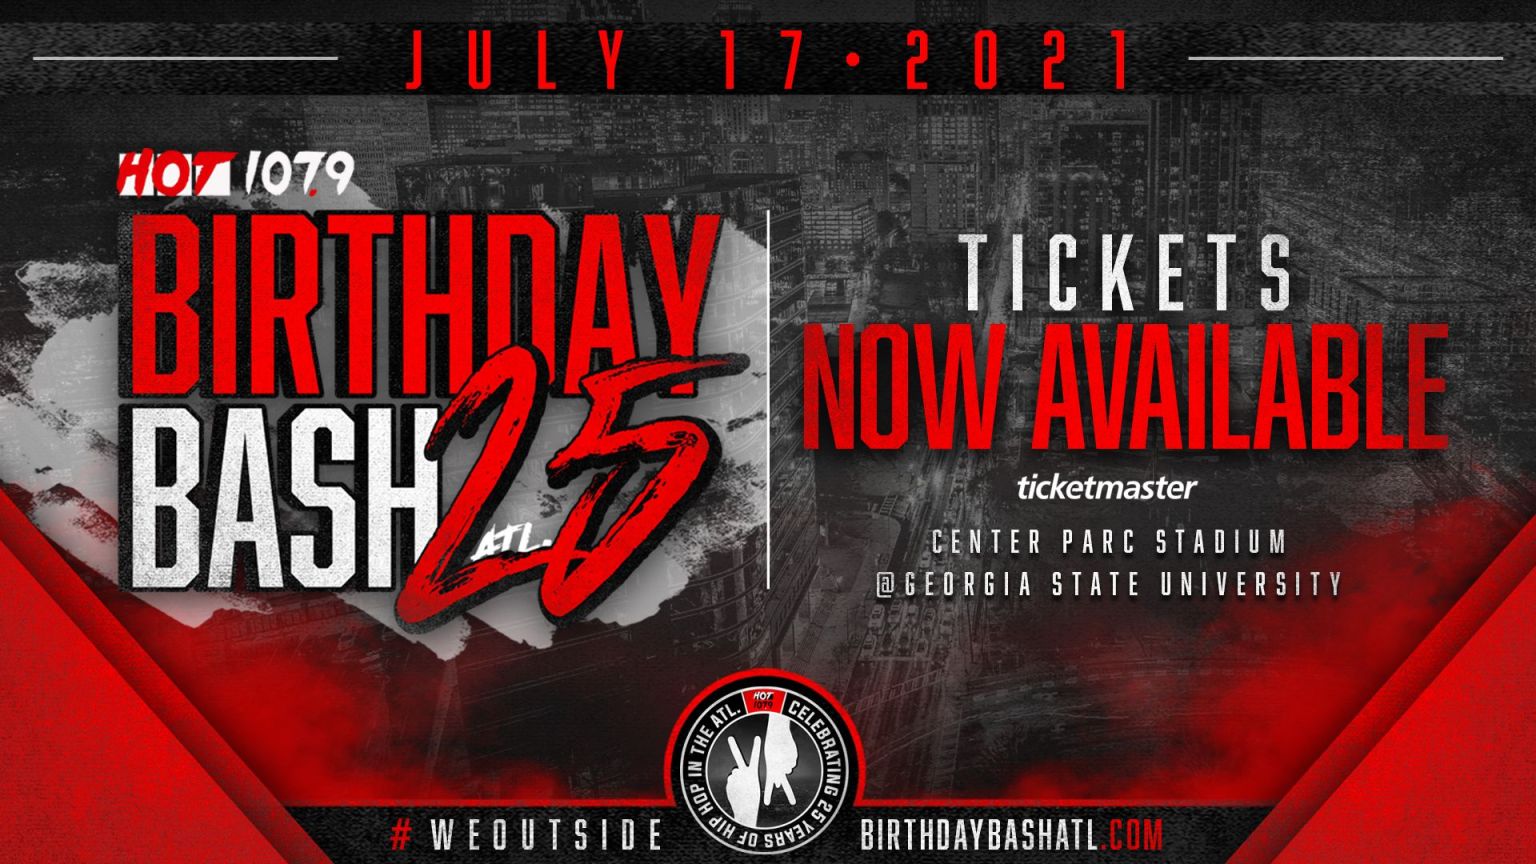 Hot 107.9 With Host It's 25th Birthday Bash On July 17th; Here's The Lineup